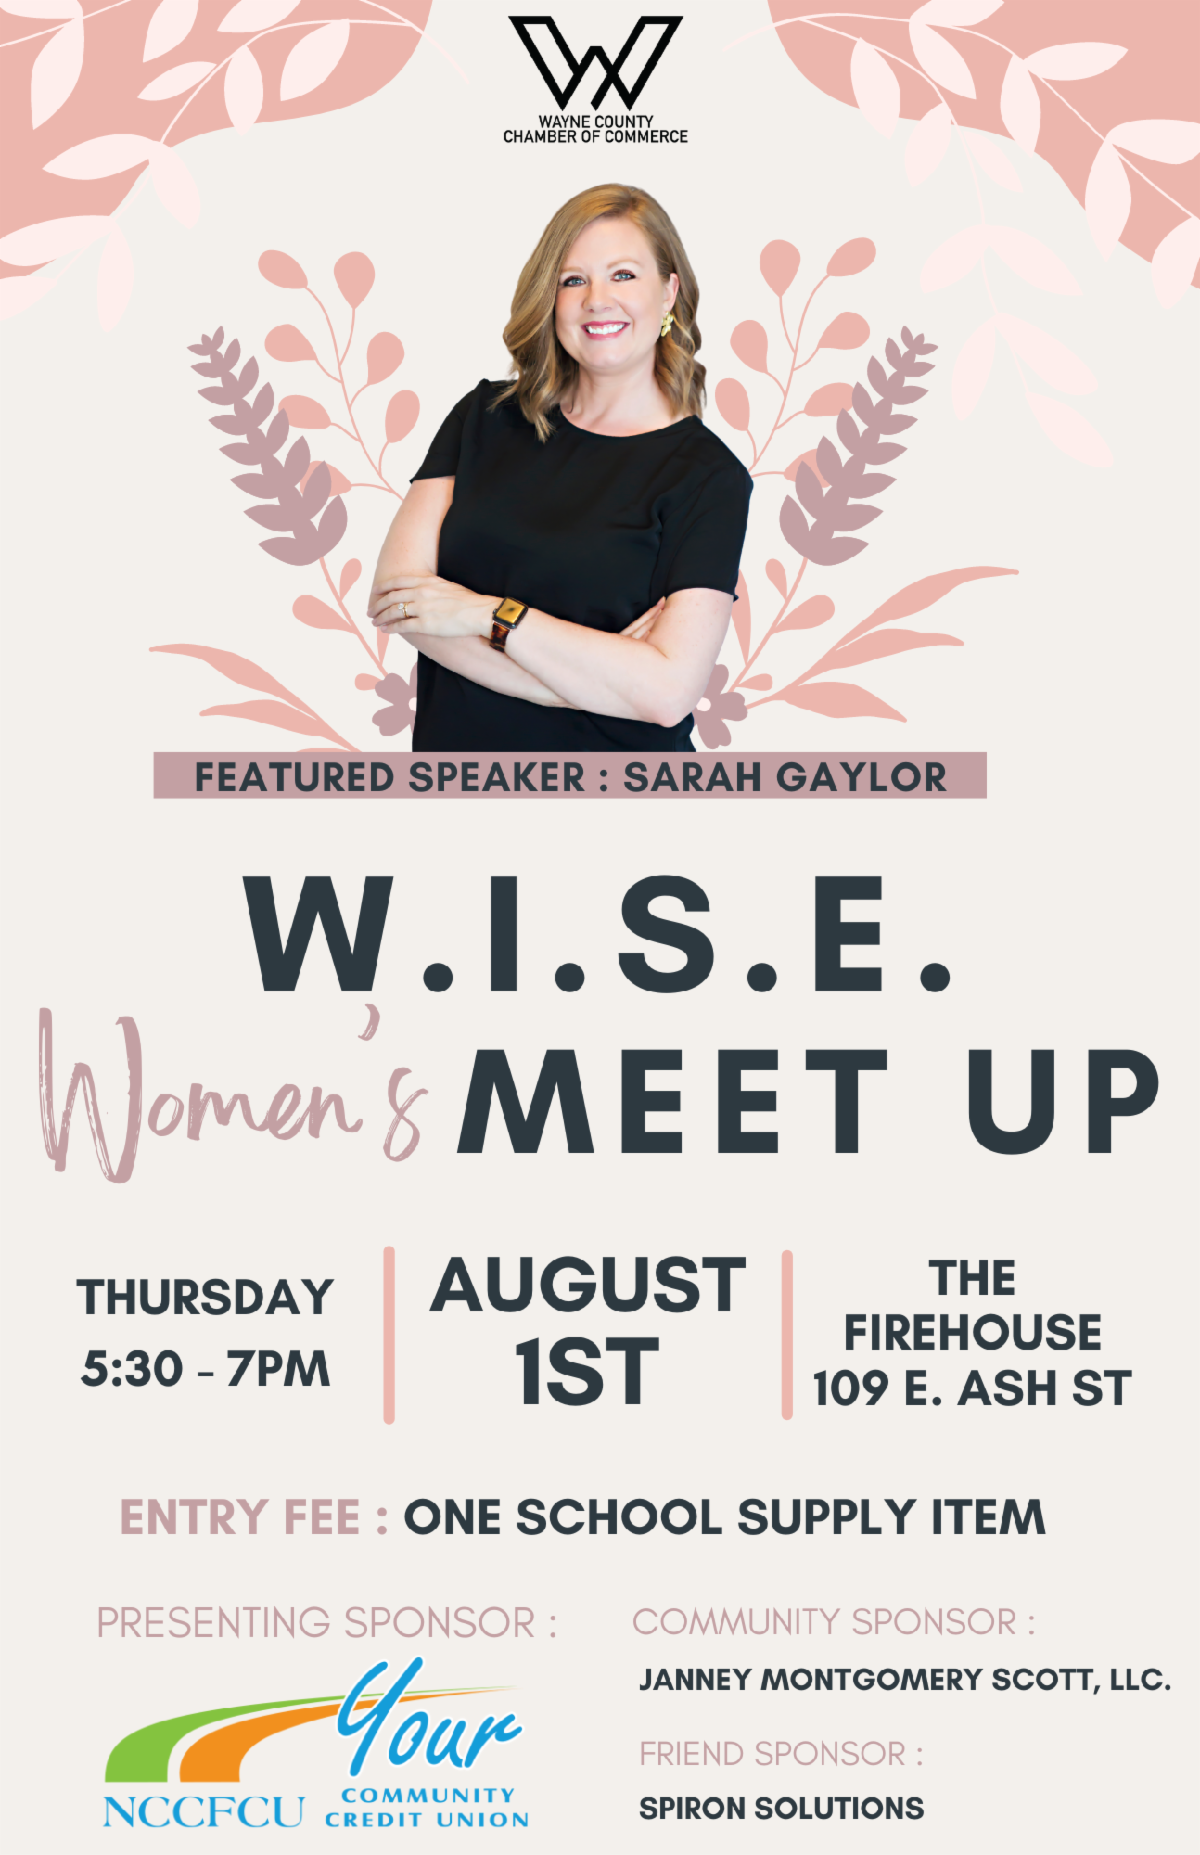 W.I.S.E Women’s Meet Up Being Held Aug. 1